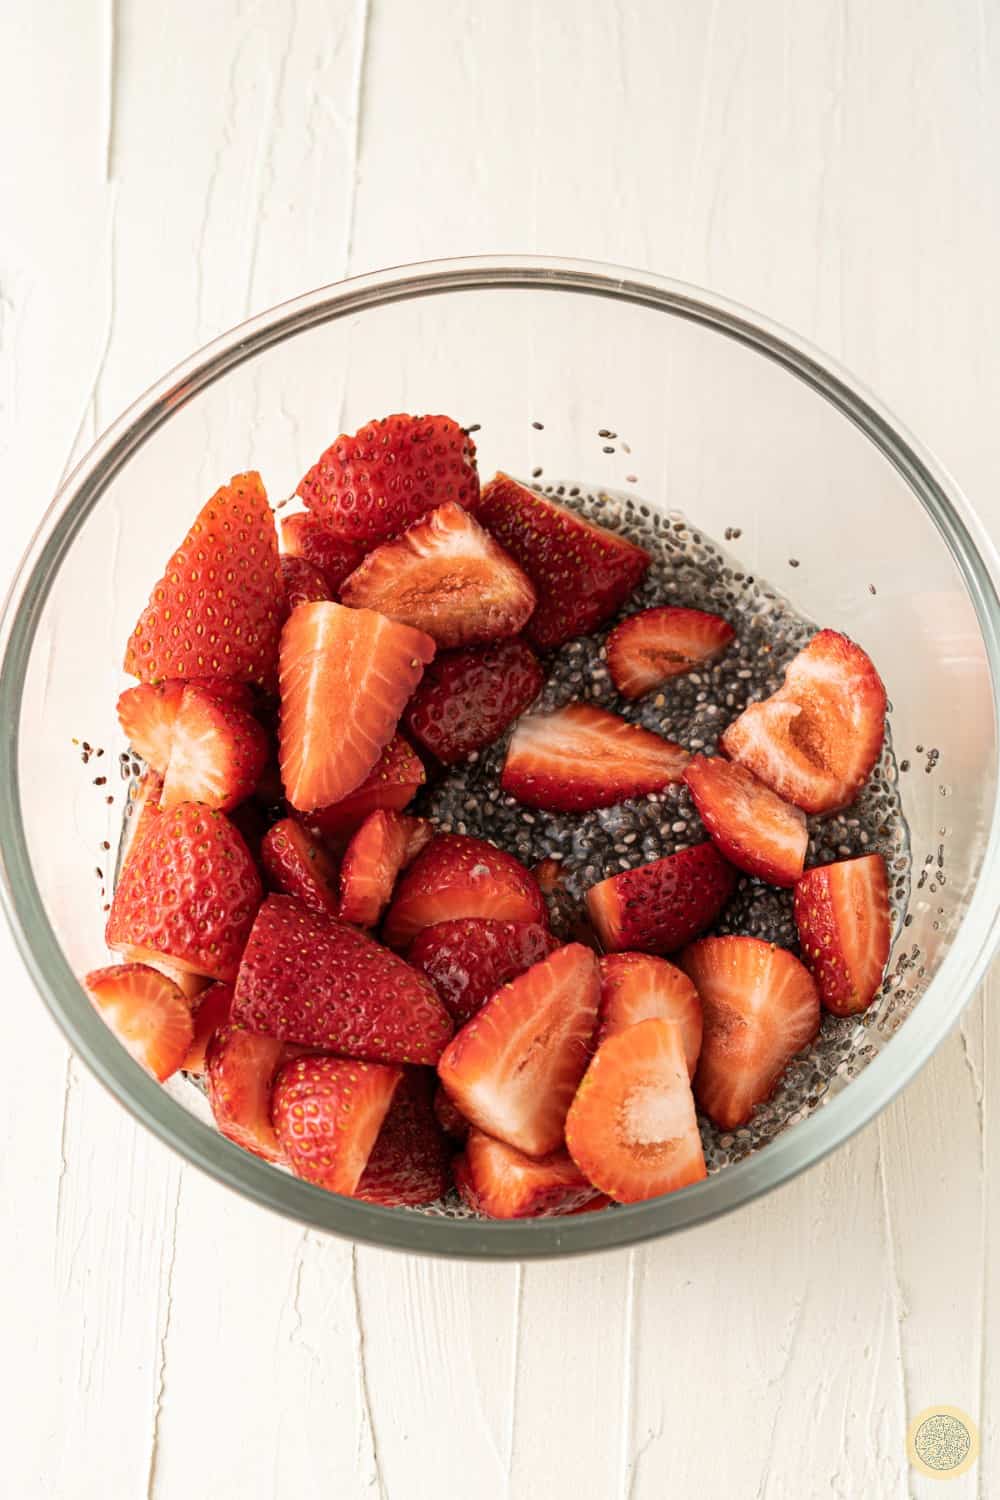 Add chia seeds and the strawberry